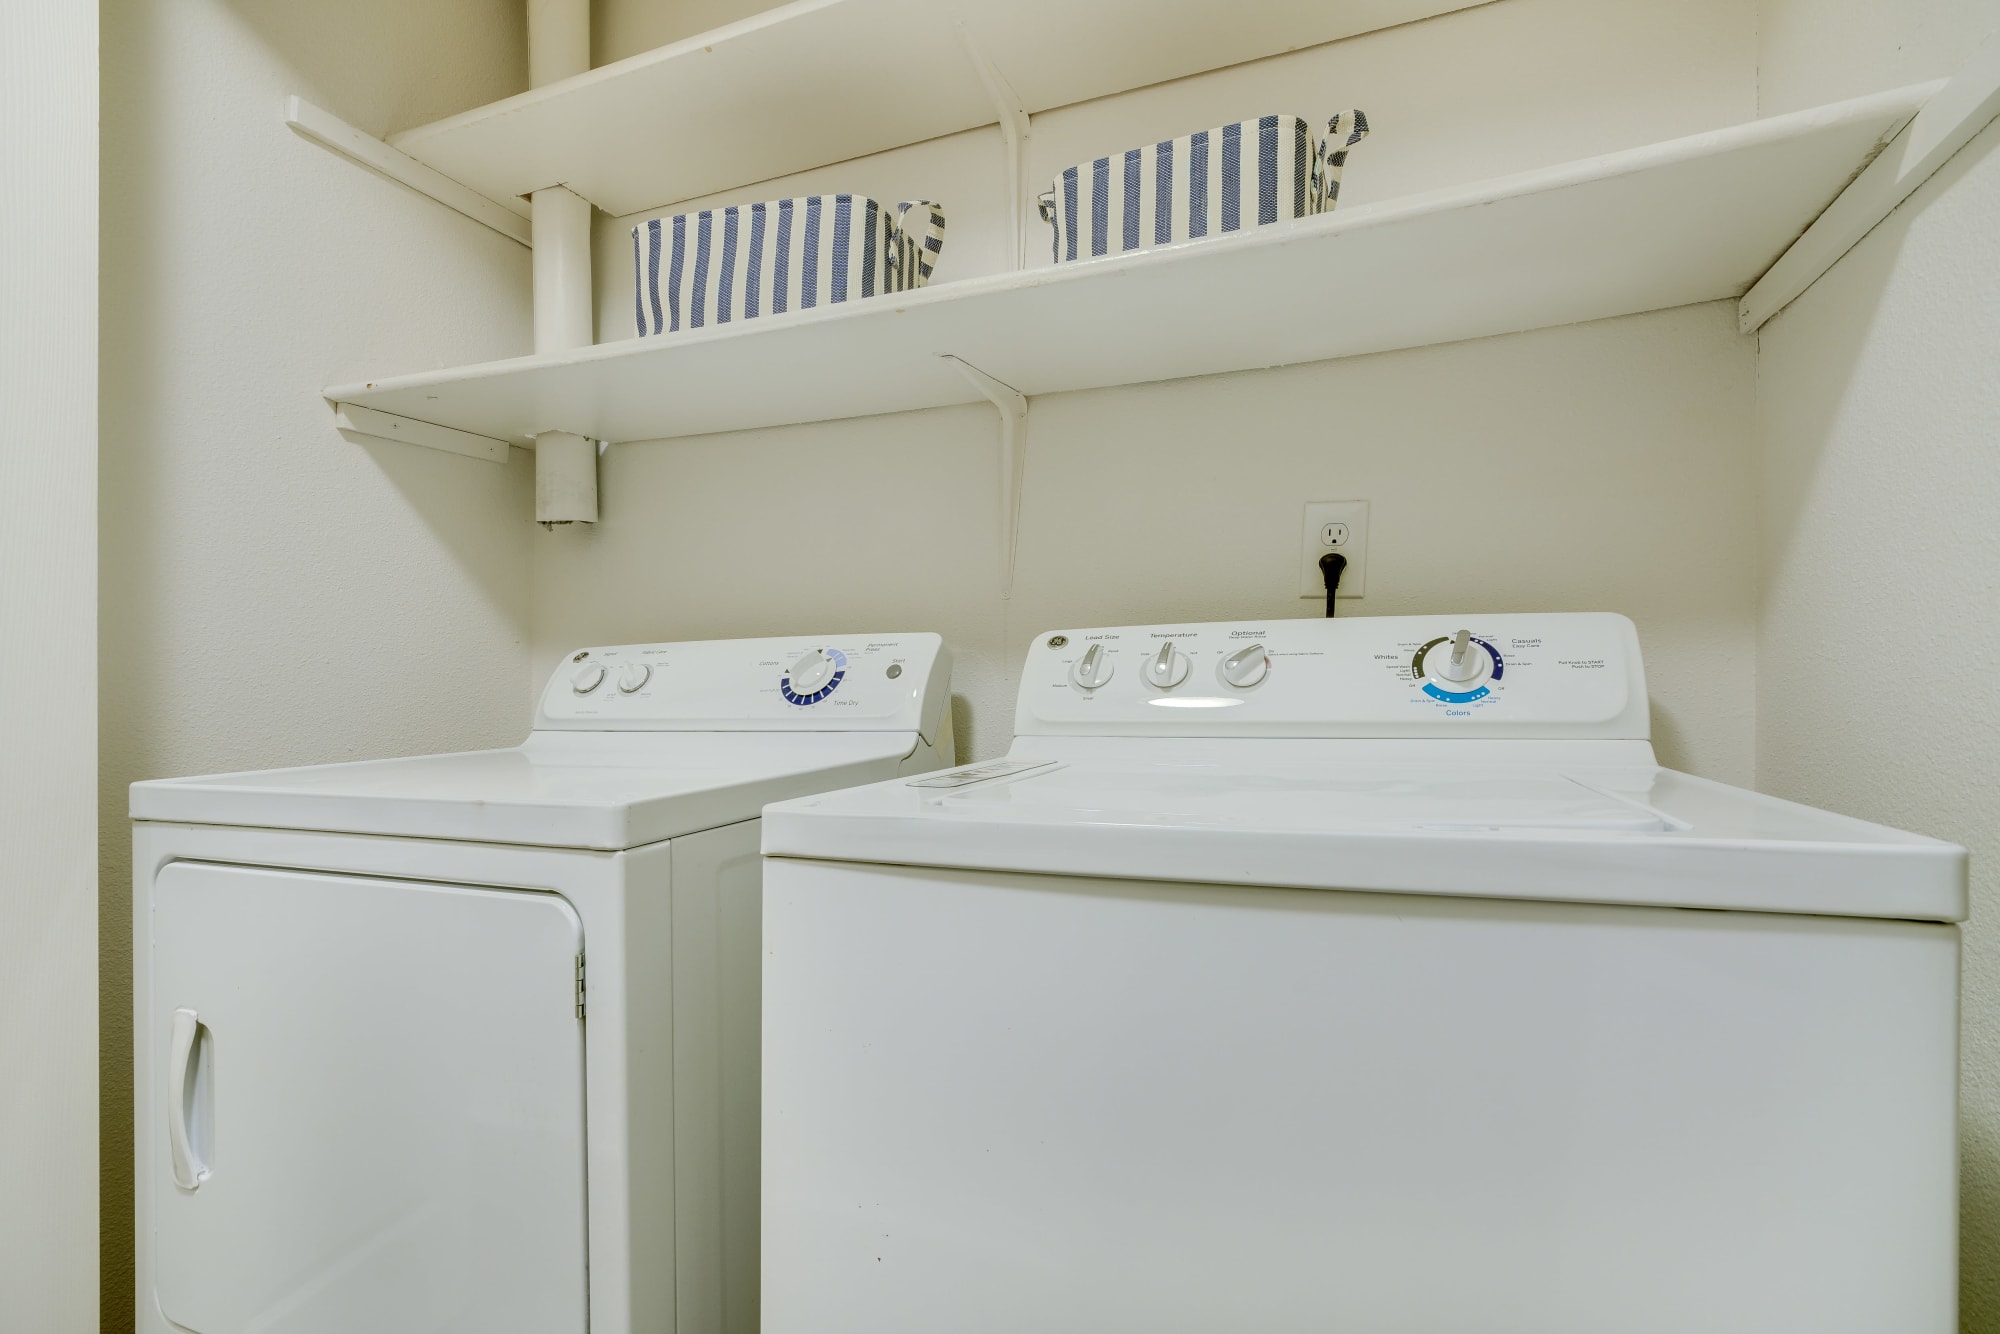 Washer and dryer at Walnut Grove Landing Apartments in Vancouver, Washington